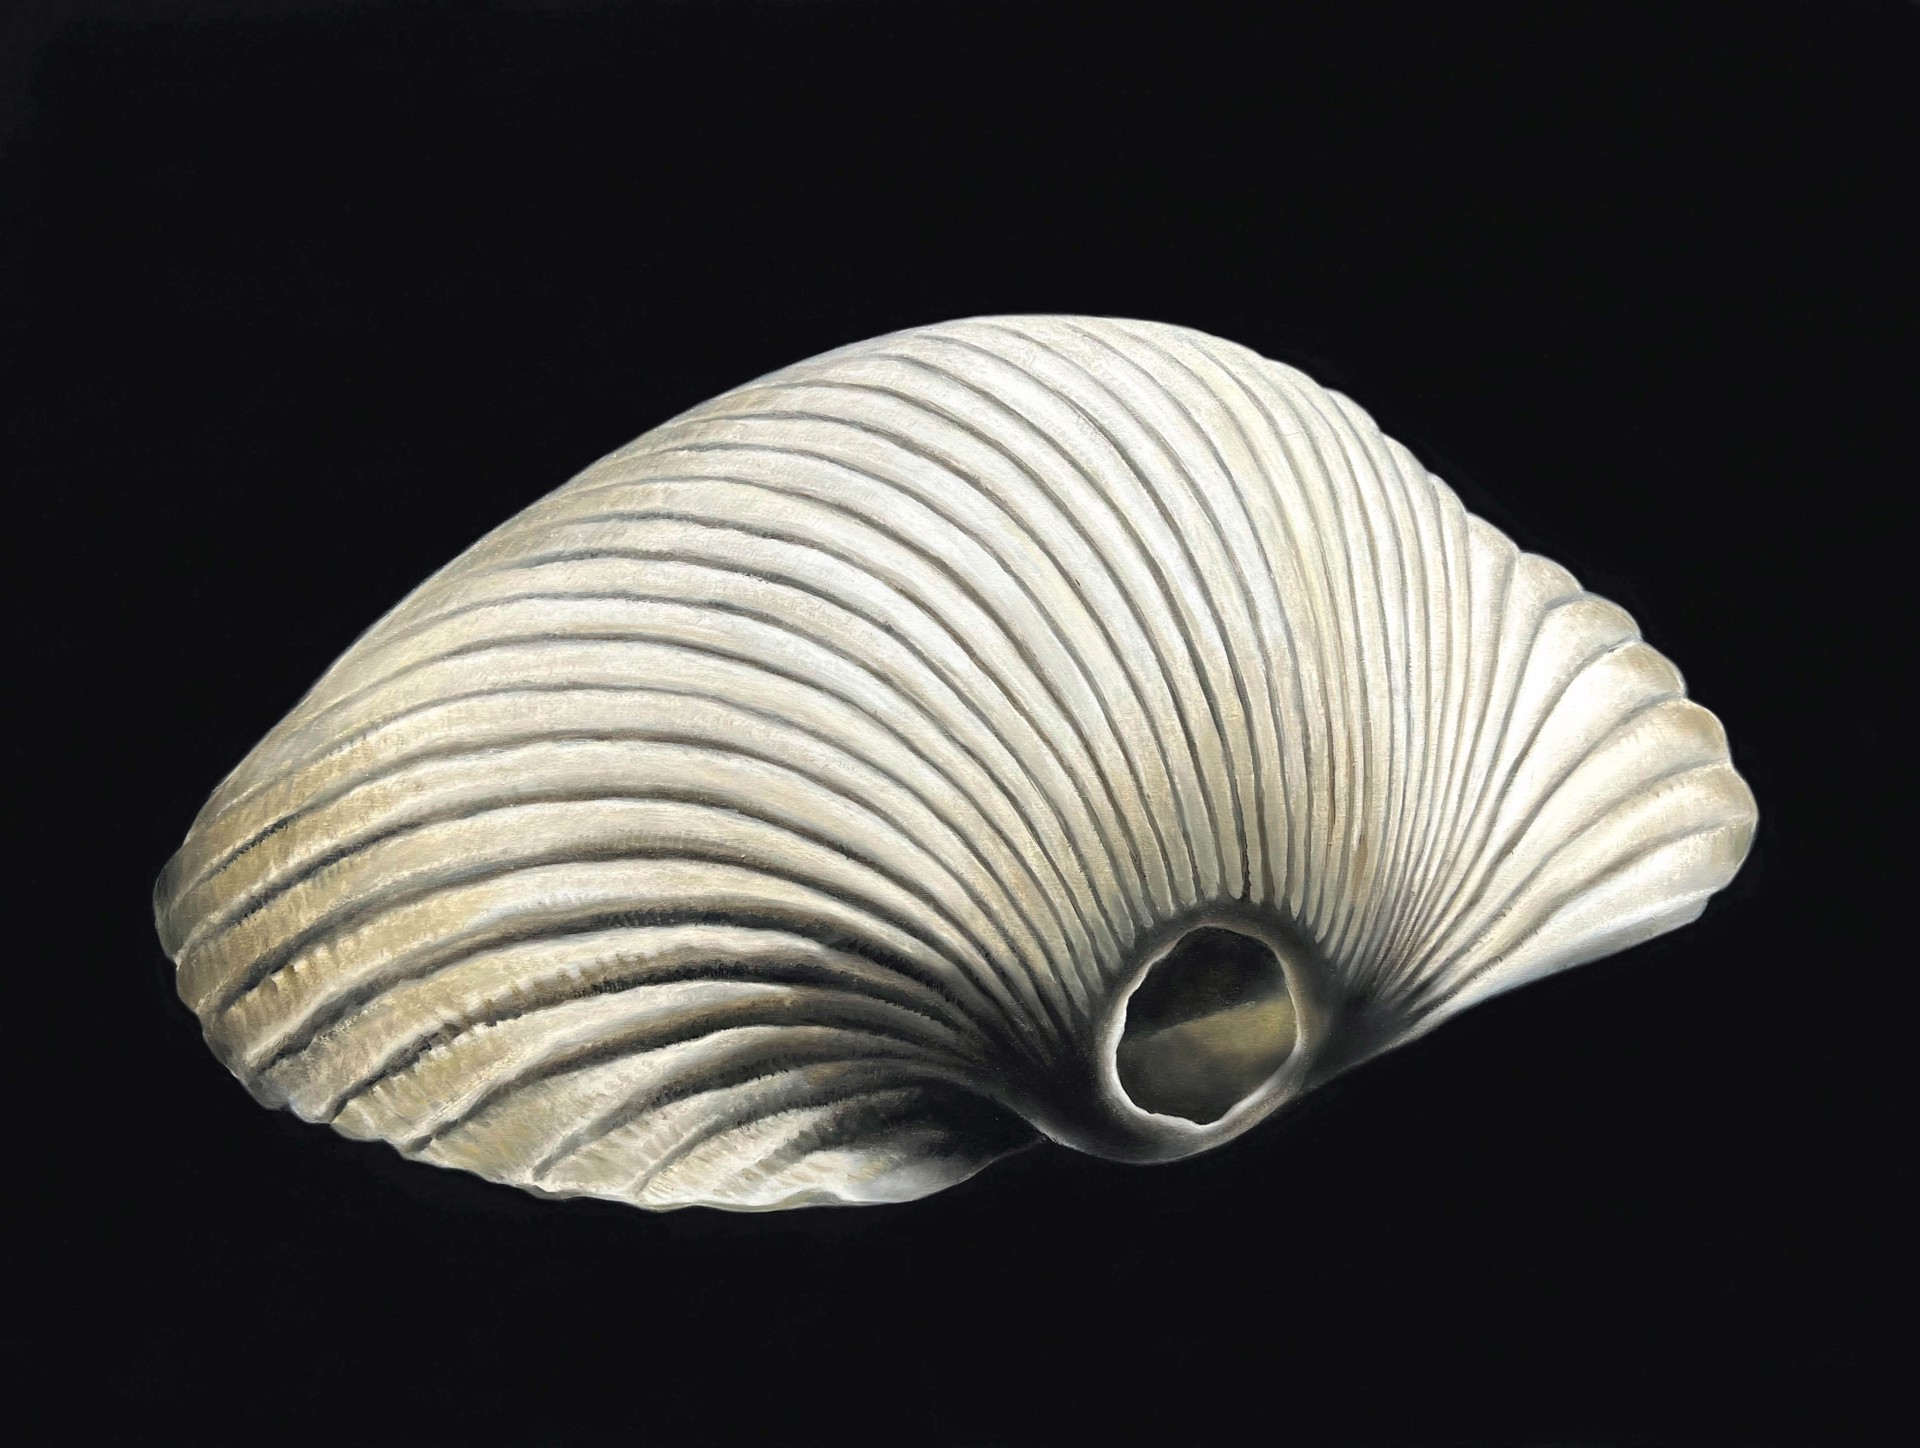 Ark Shell on Black by Renee Levin